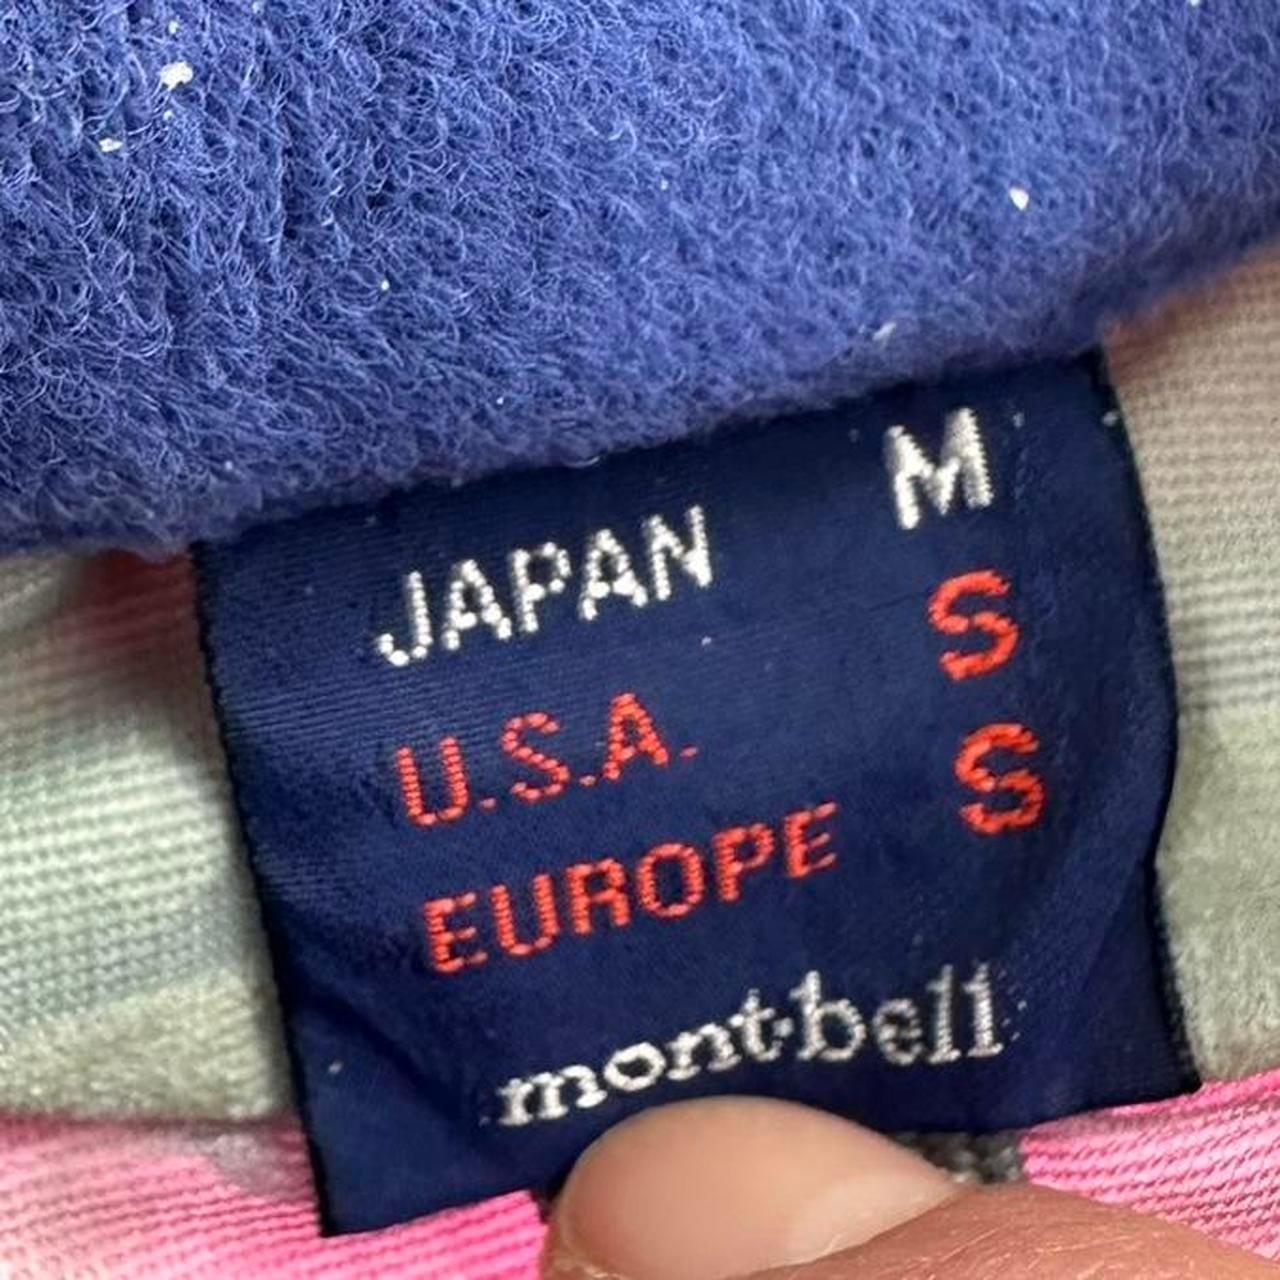 Vintage Montbell hooded jacket woman’s size S - Known Source